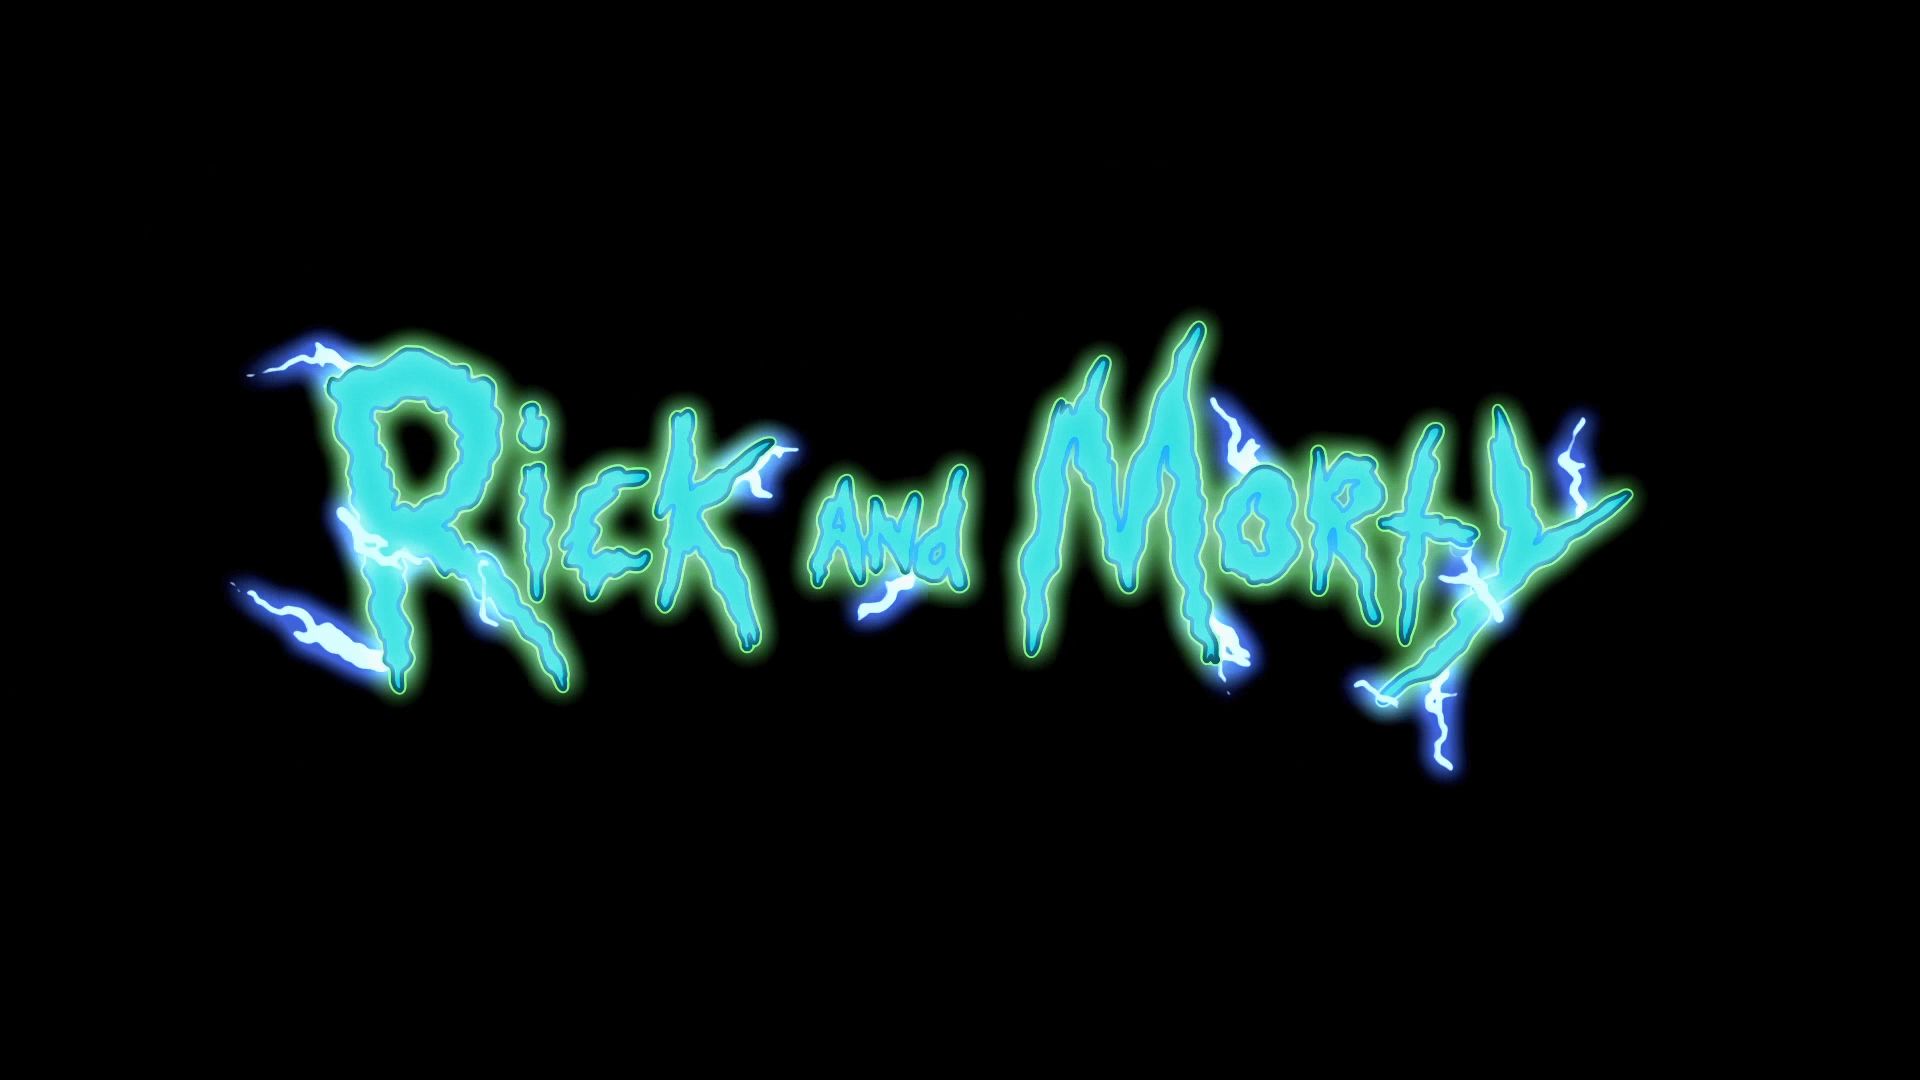 rick and morty, tv show Free Stock Photo